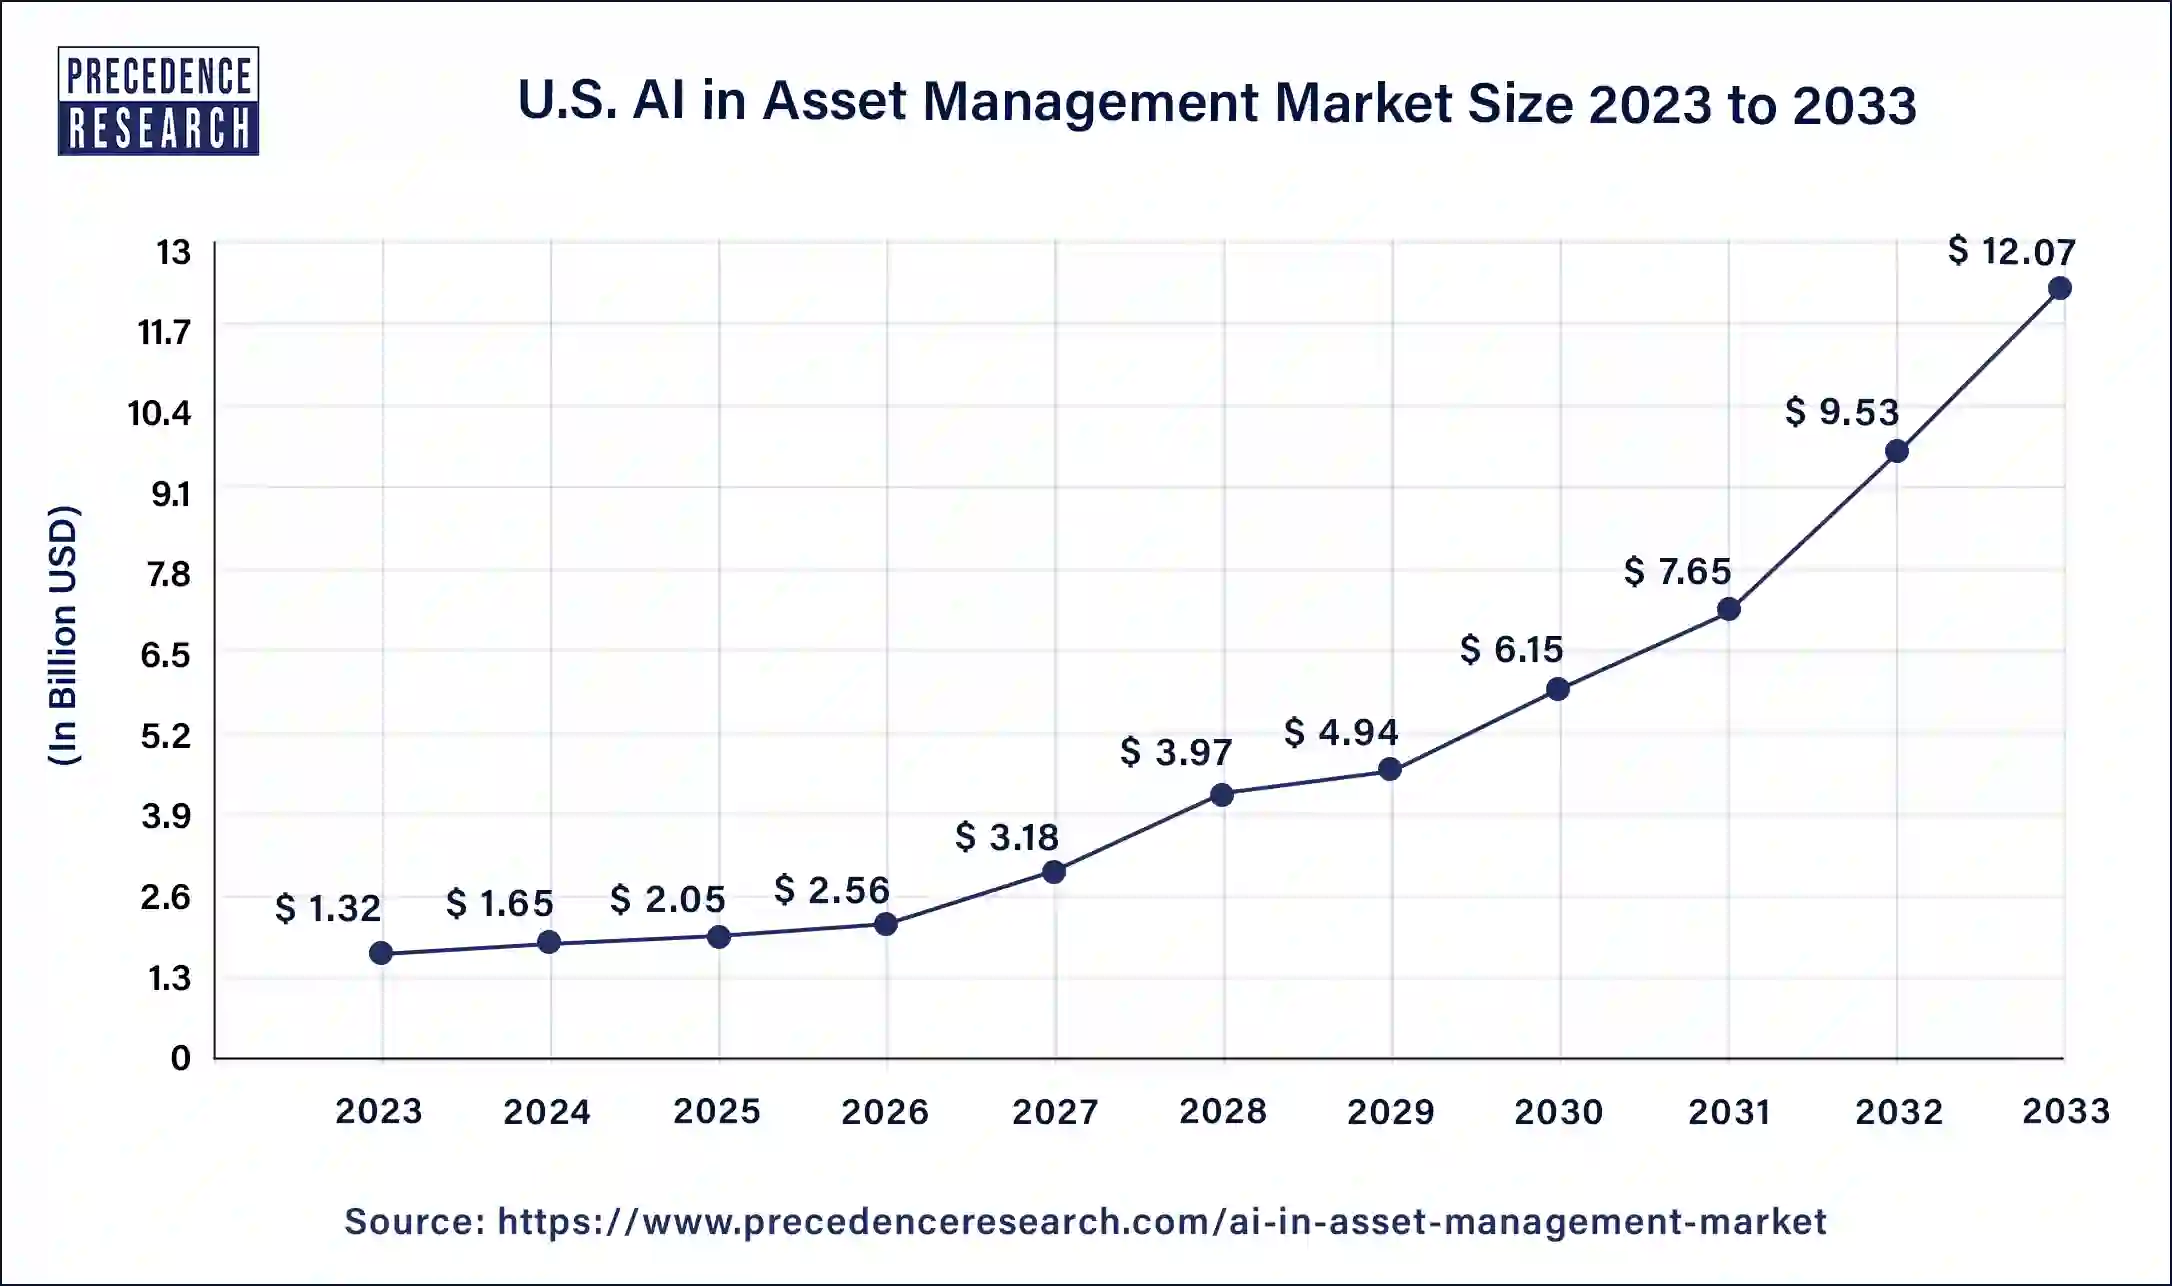 U.S. AI in Asset Management Market Size 2024 to 2033